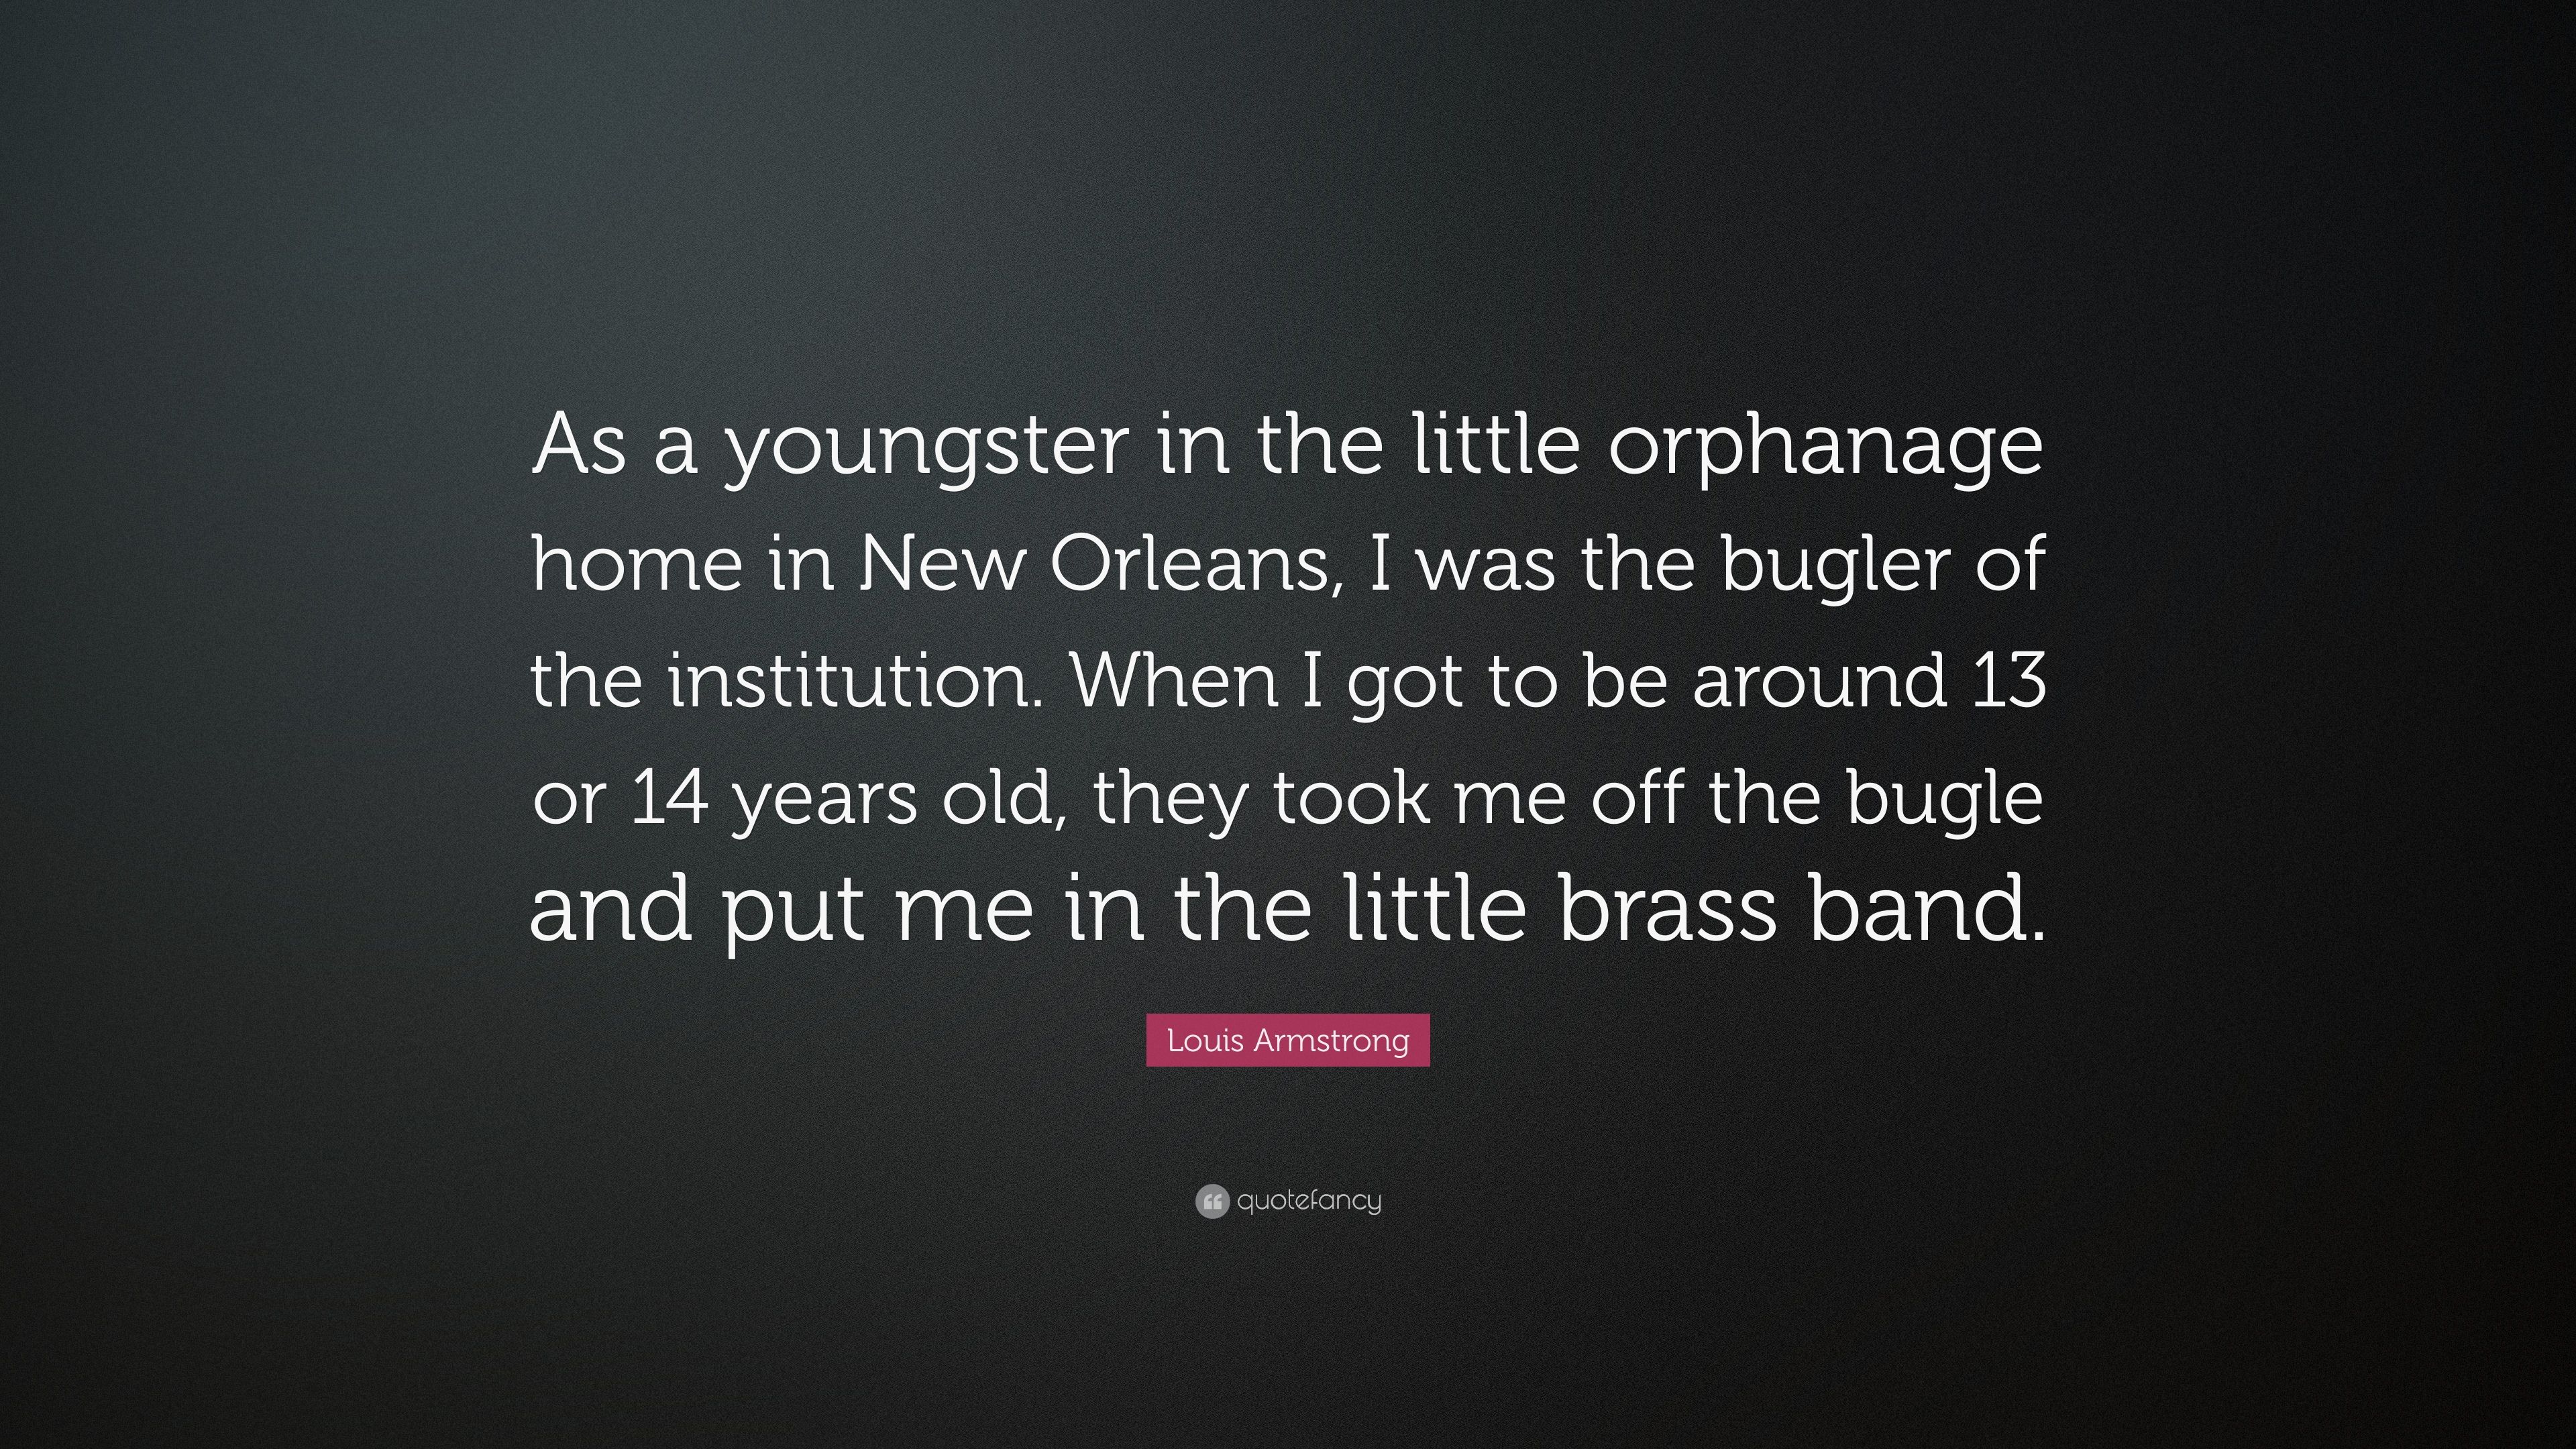 Louis Armstrong Quote: “As a youngster in the little orphanage home